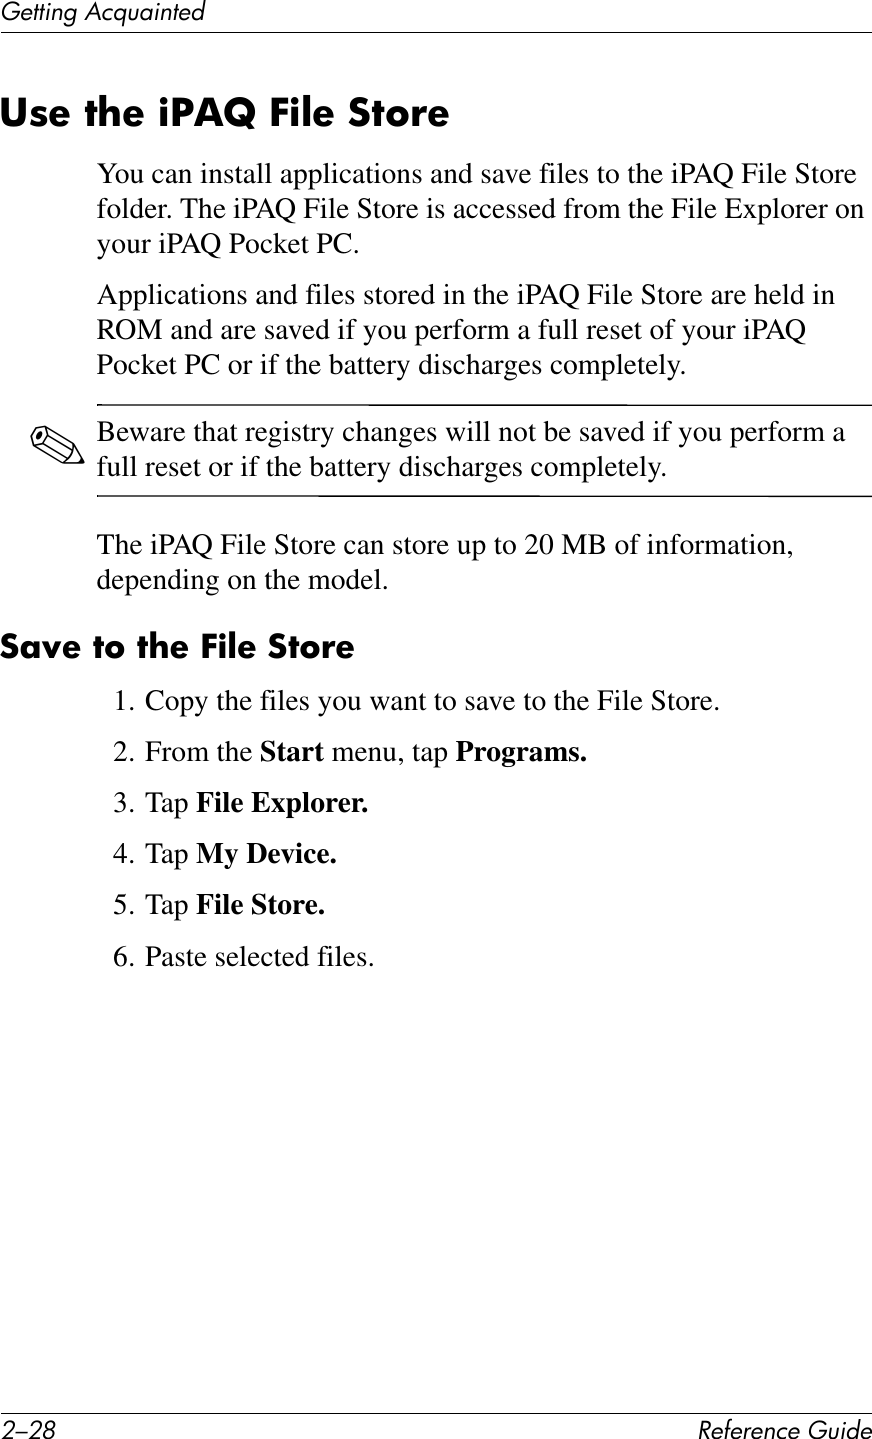 0/0G !&quot;#&quot;$&quot;%&amp;&quot;&apos;()*+&quot;(&quot;11*%2&apos;&lt;&amp;T)4*%1&quot;+38&quot;&amp;7?&quot;&amp;)S,b&amp;E)@&quot;&amp;:76!&quot;You can install applications and save files to the iPAQ File Store folder. The iPAQ File Store is accessed from the File Explorer on your iPAQ Pocket PC. Applications and files stored in the iPAQ File Store are held in ROM and are saved if you perform a full reset of your iPAQ Pocket PC or if the battery discharges completely.✎Beware that registry changes will not be saved if you perform a full reset or if the battery discharges completely.The iPAQ File Store can store up to 20 MB of information, depending on the model.:;N&quot;&amp;76&amp;7?&quot;&amp;E)@&quot;&amp;:76!&quot;1. Copy the files you want to save to the File Store.2. From the Start menu, tap Programs.3. Tap File Explorer.4. Tap My Device.5. Tap File Store.6. Paste selected files.